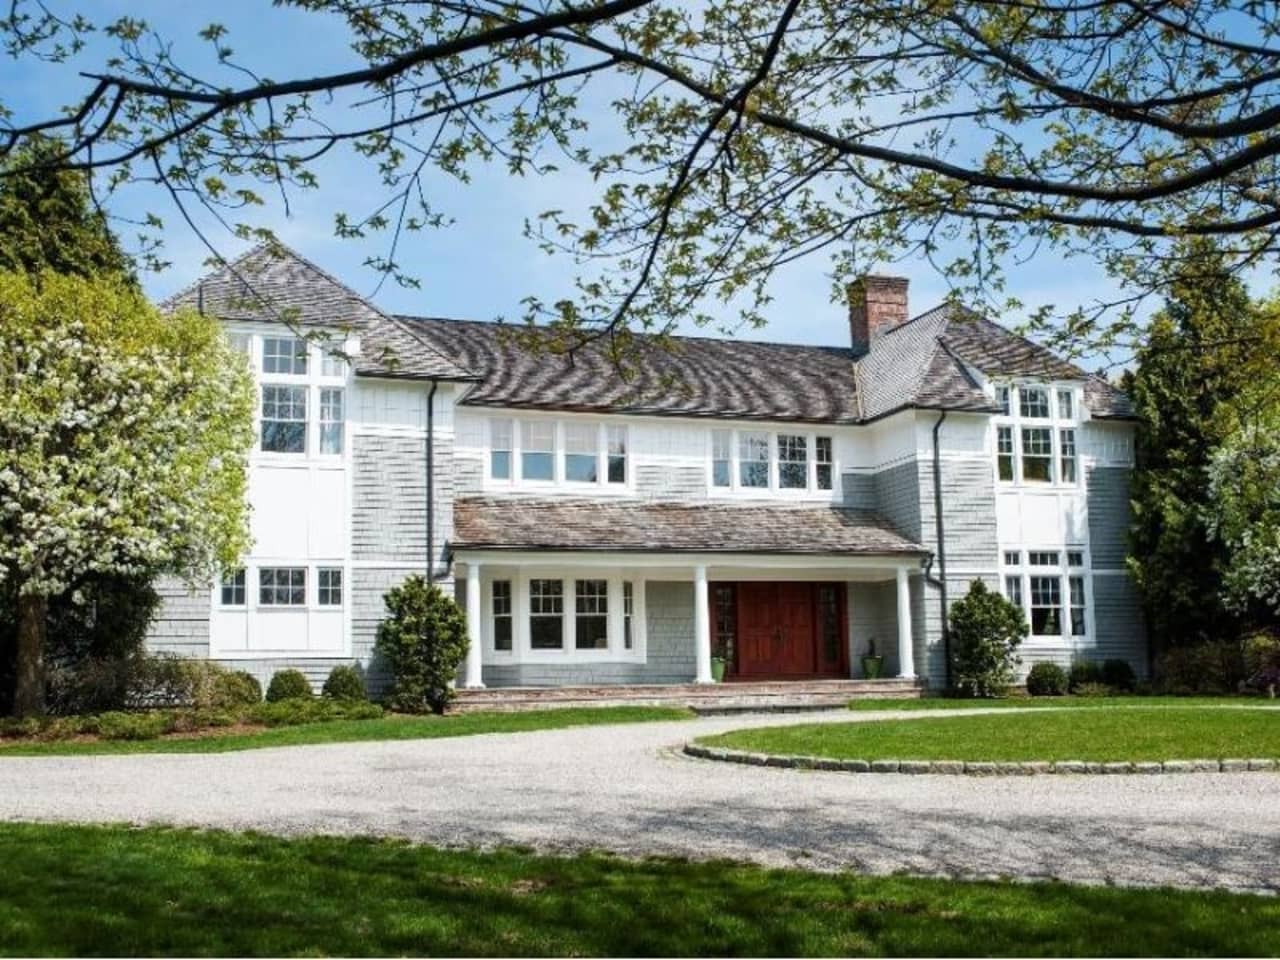 The home at 1021 Ponus Ridge Road in New Canaan will be open on Sunday from 1 to 3 p.m.